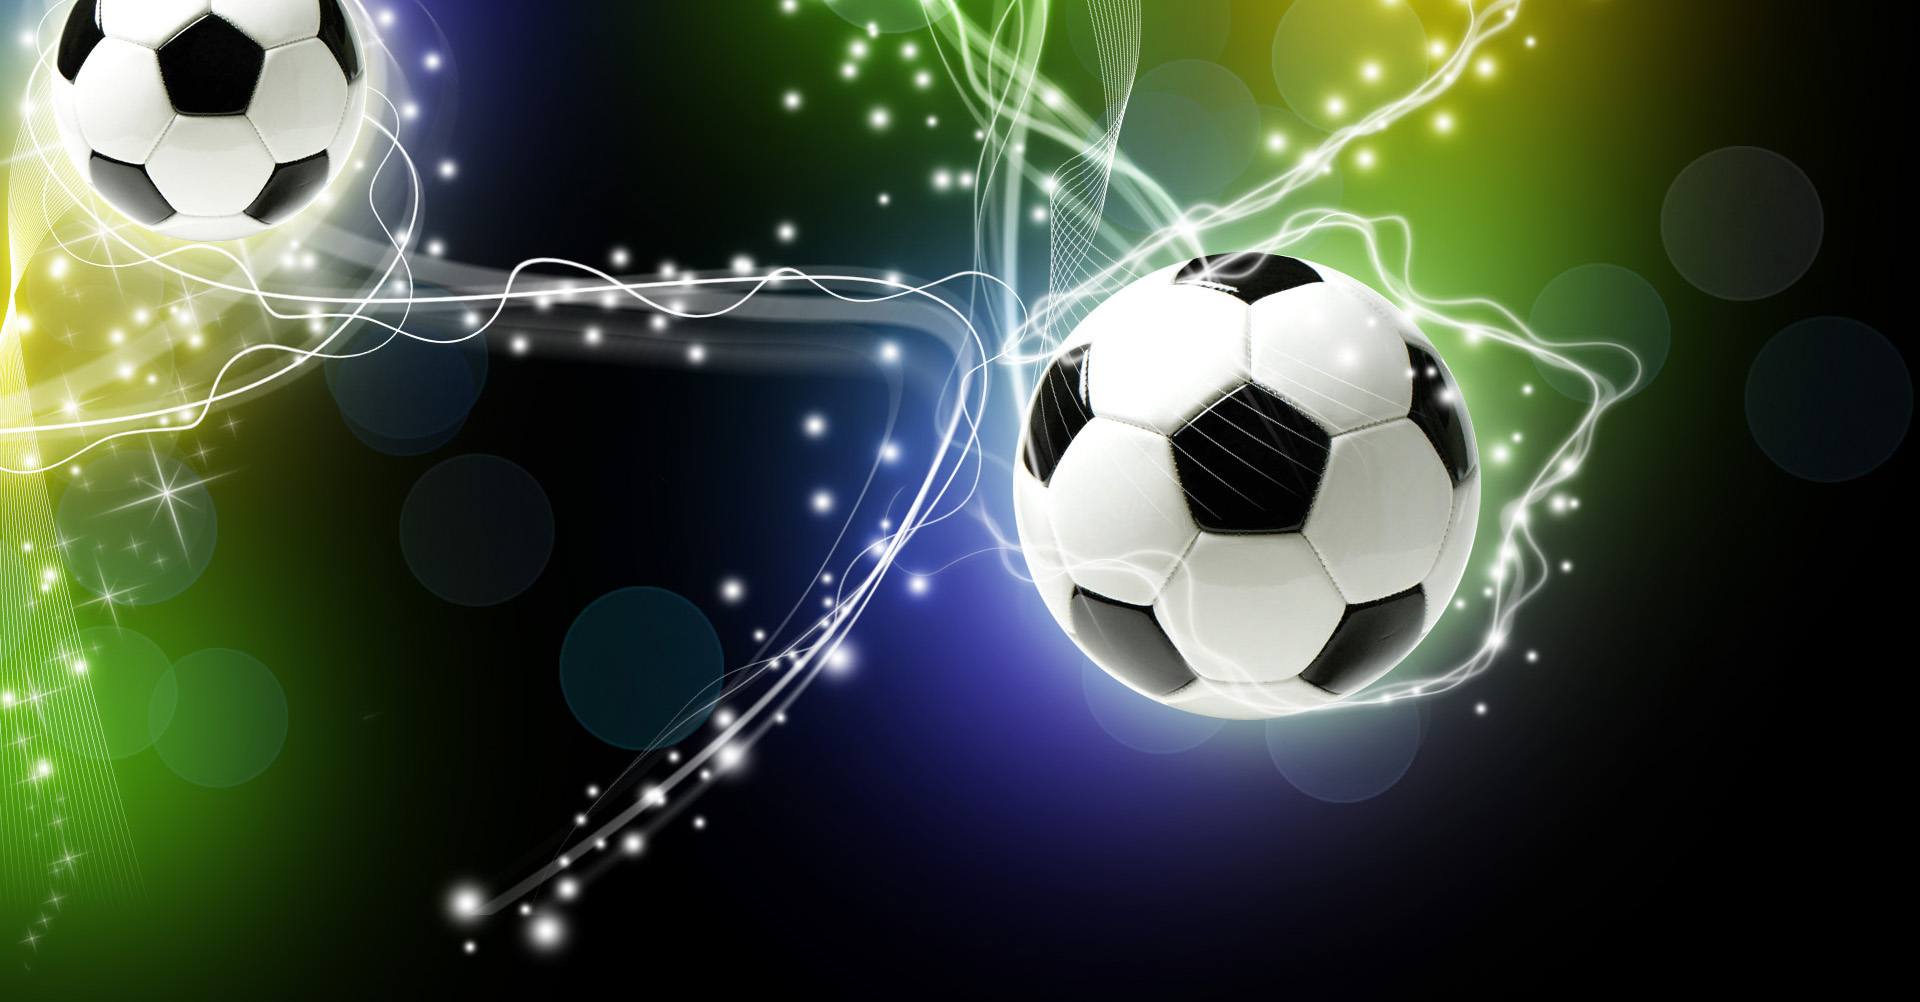 Background Wallpaper Football HD Background